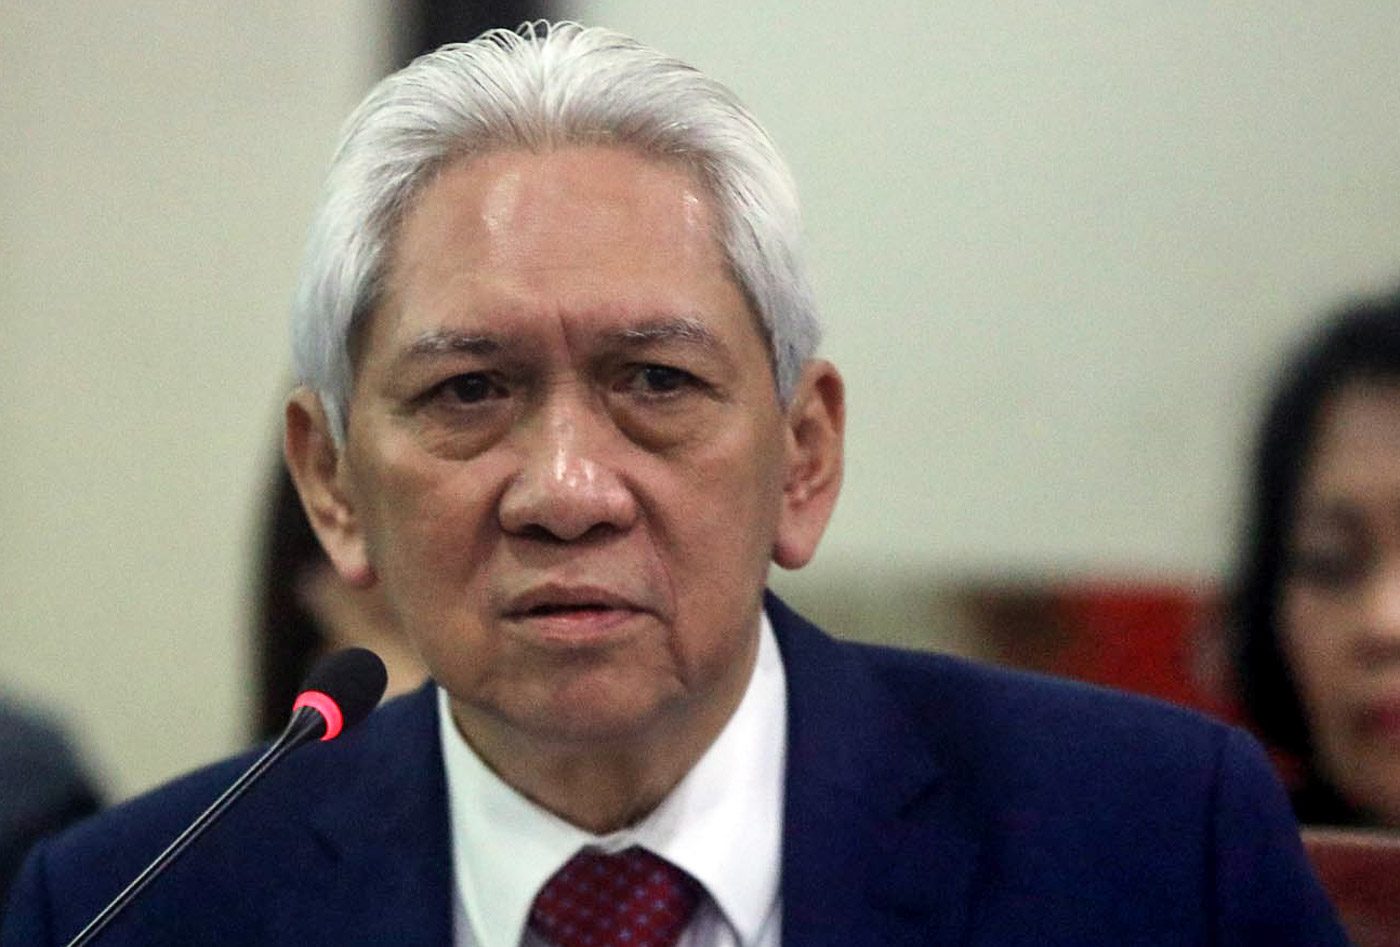 Ombudsman probe delayed by DOH’s slow response to subpoenas – Martires